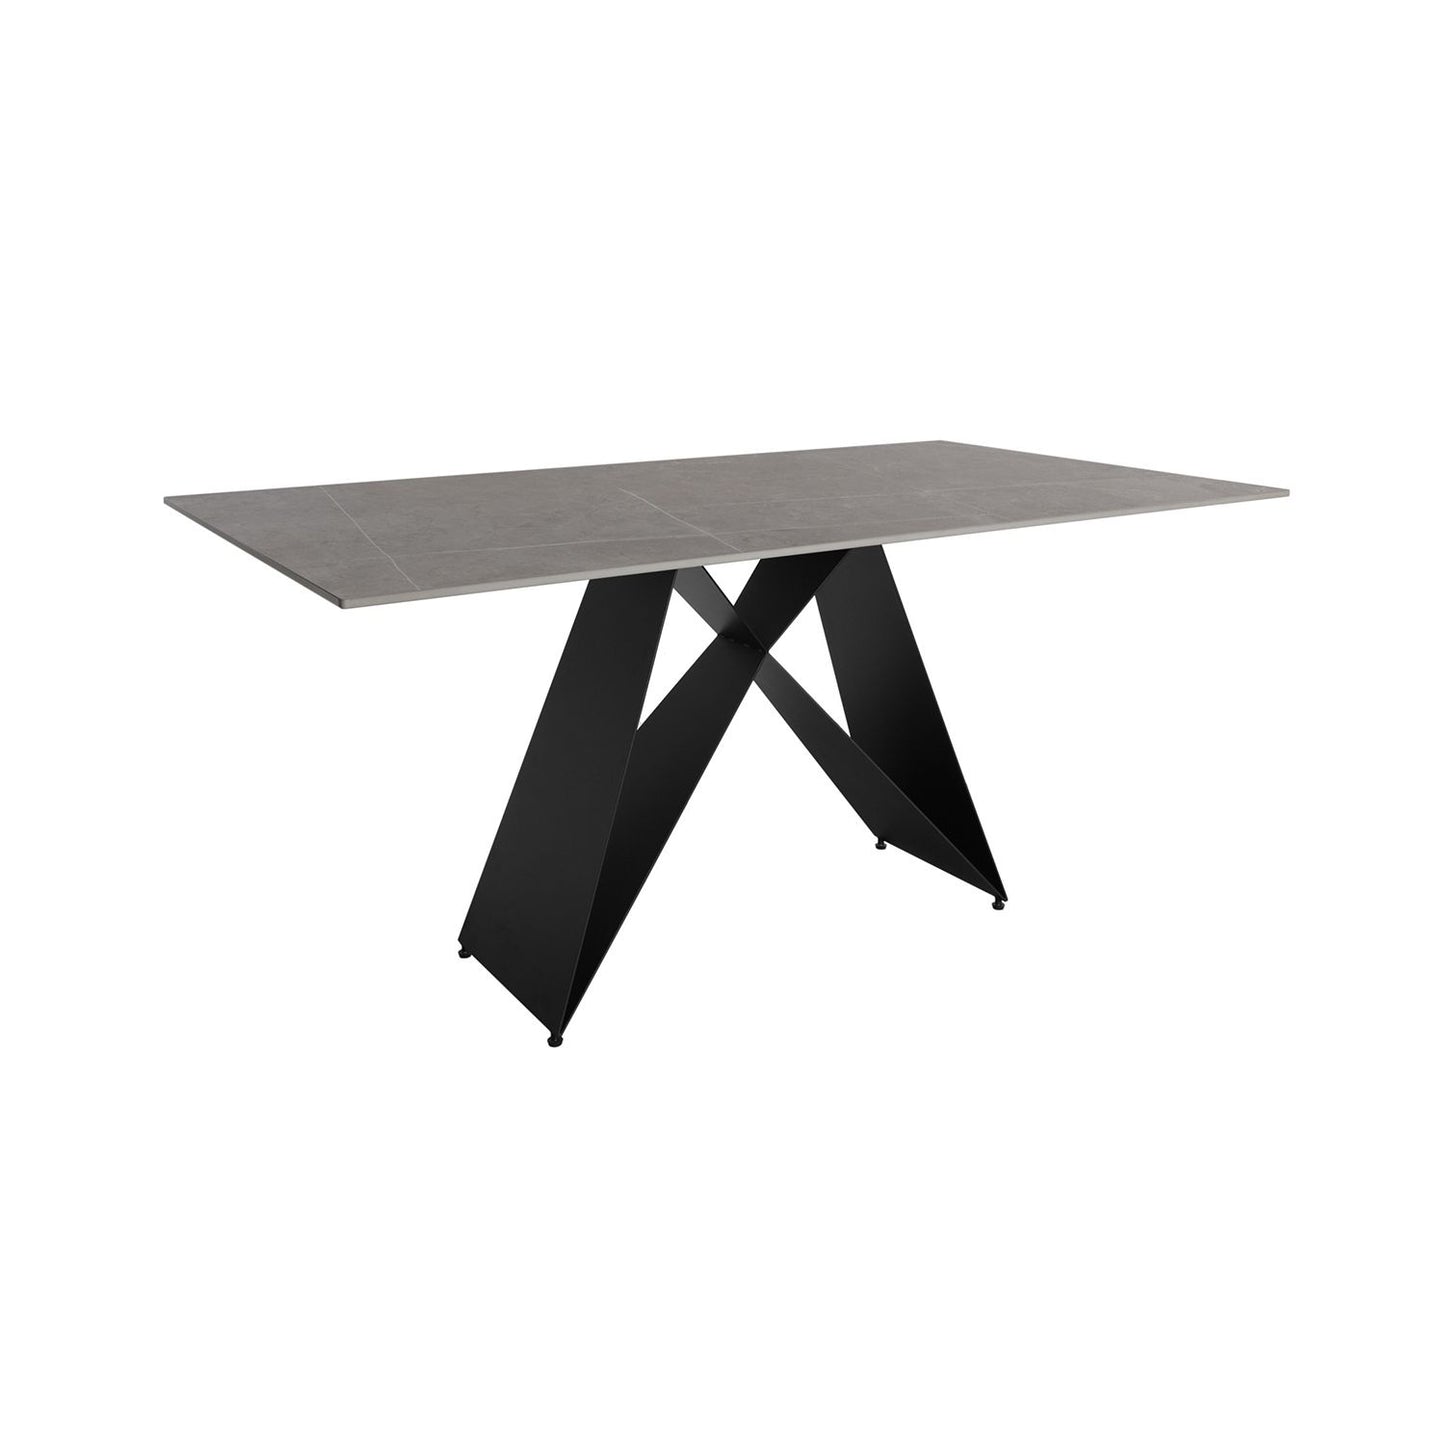 East Chester Dining Table - 160cm